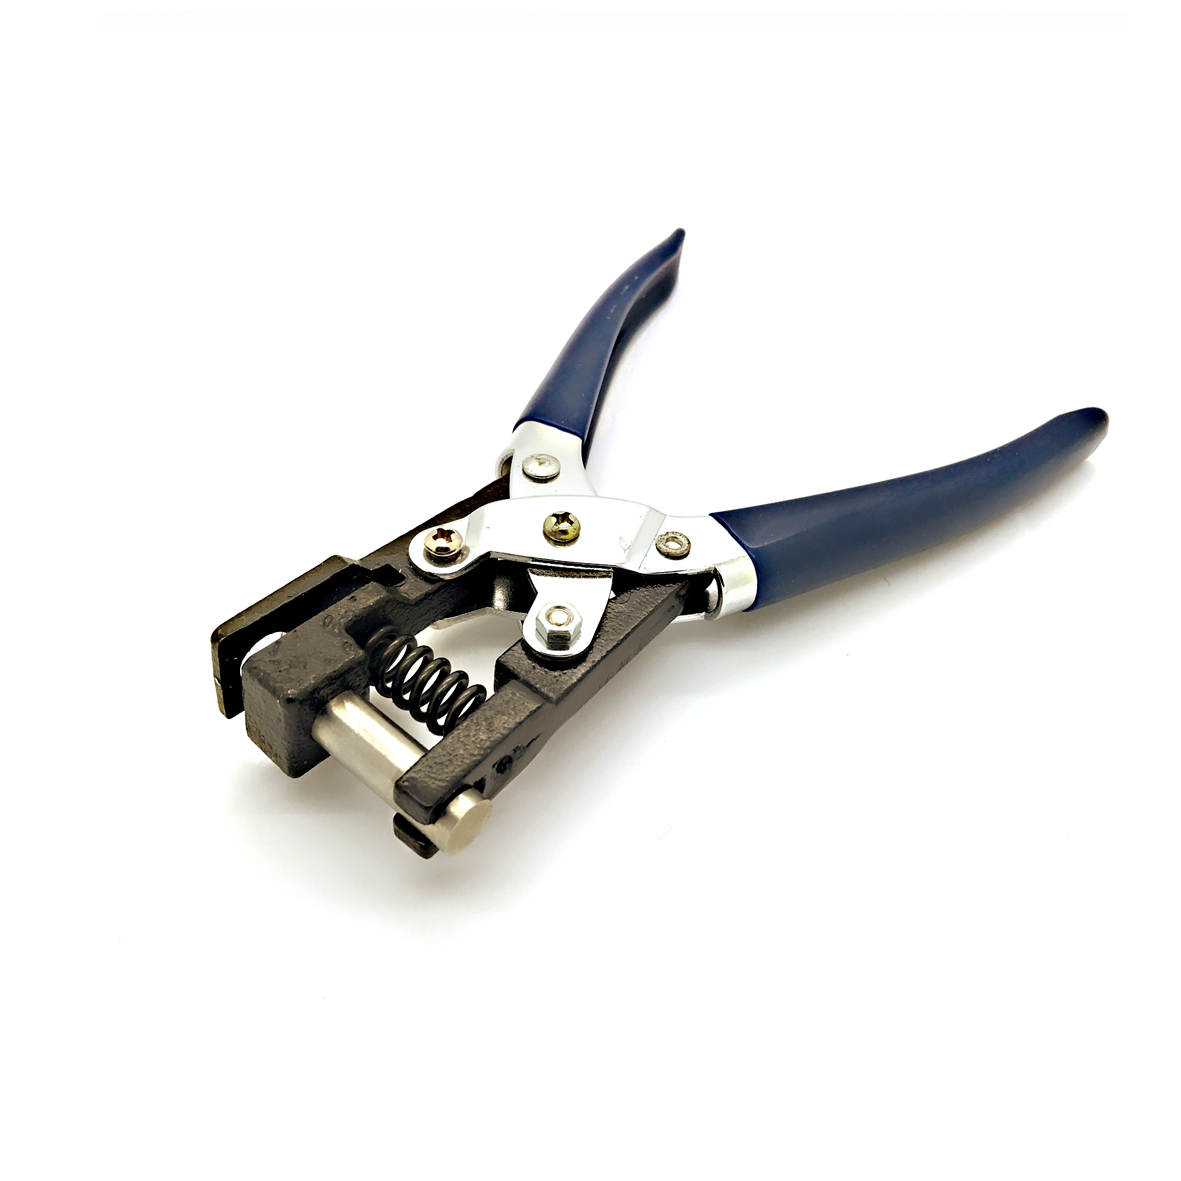 Heavy Duty Hole Punch - 0.4 (10mm) Online USA.